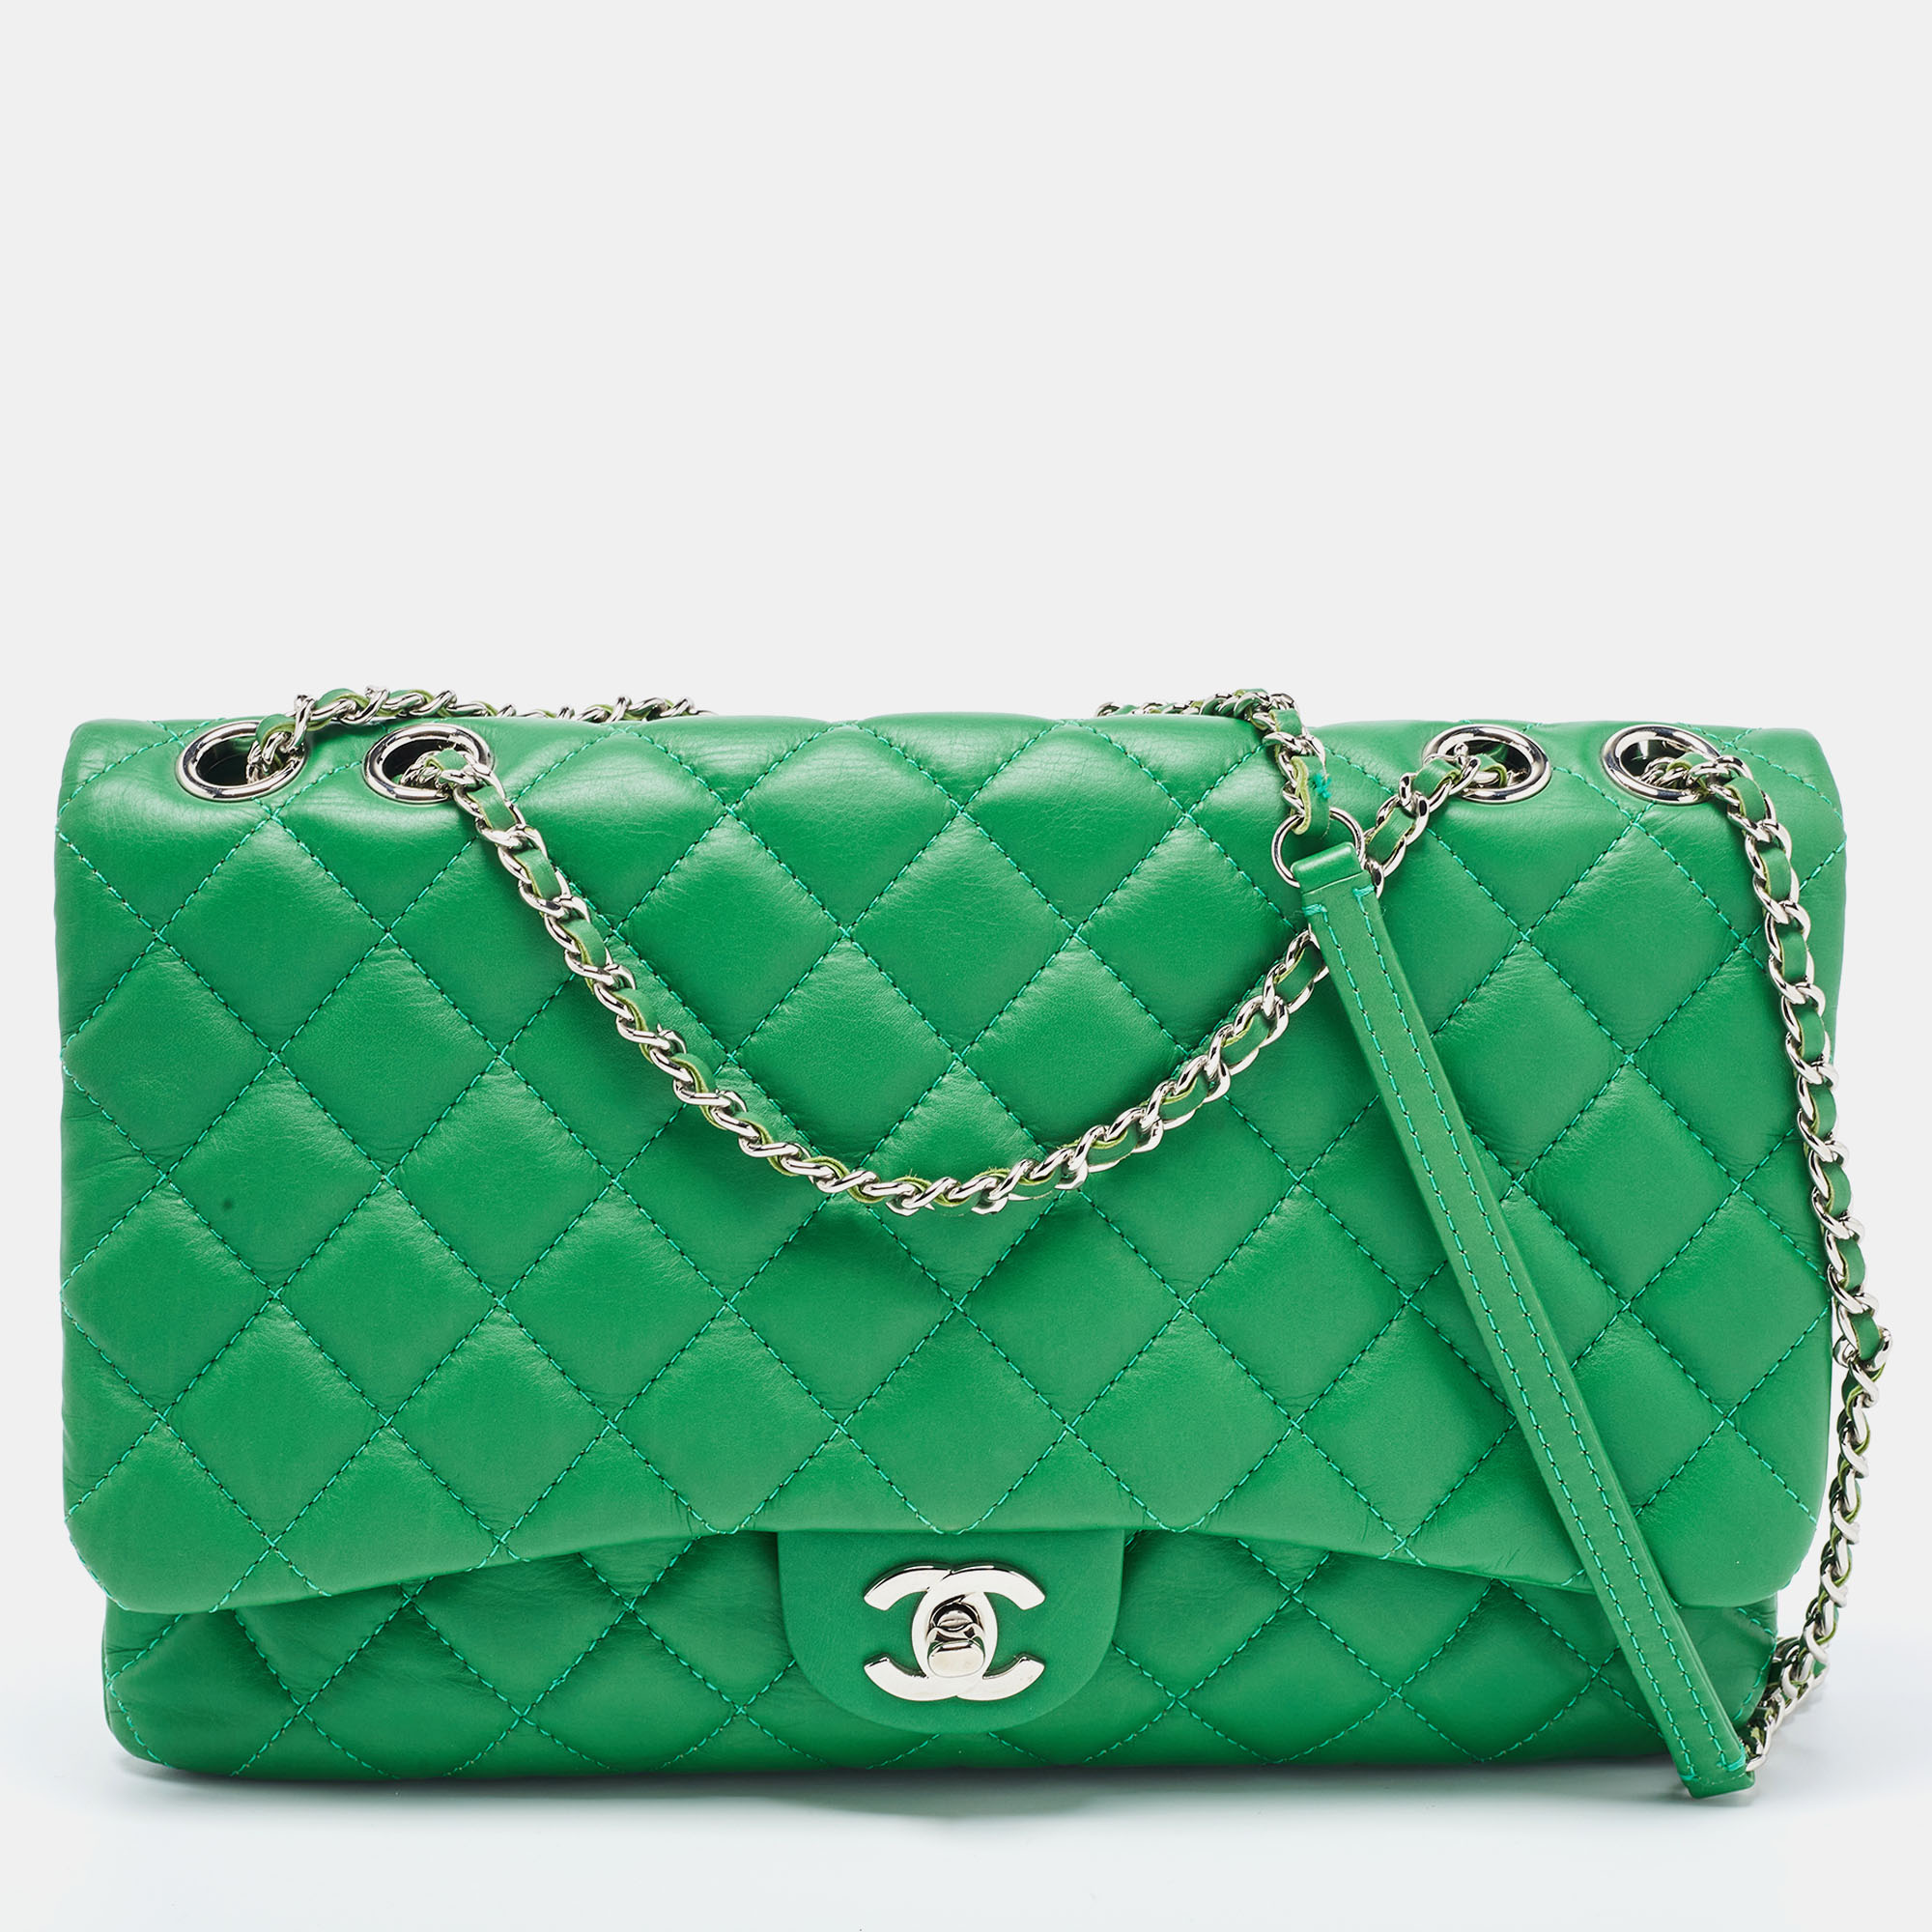 Pre-owned Chanel Green Quilted Leather 3 Compartment Classic Flap Bag